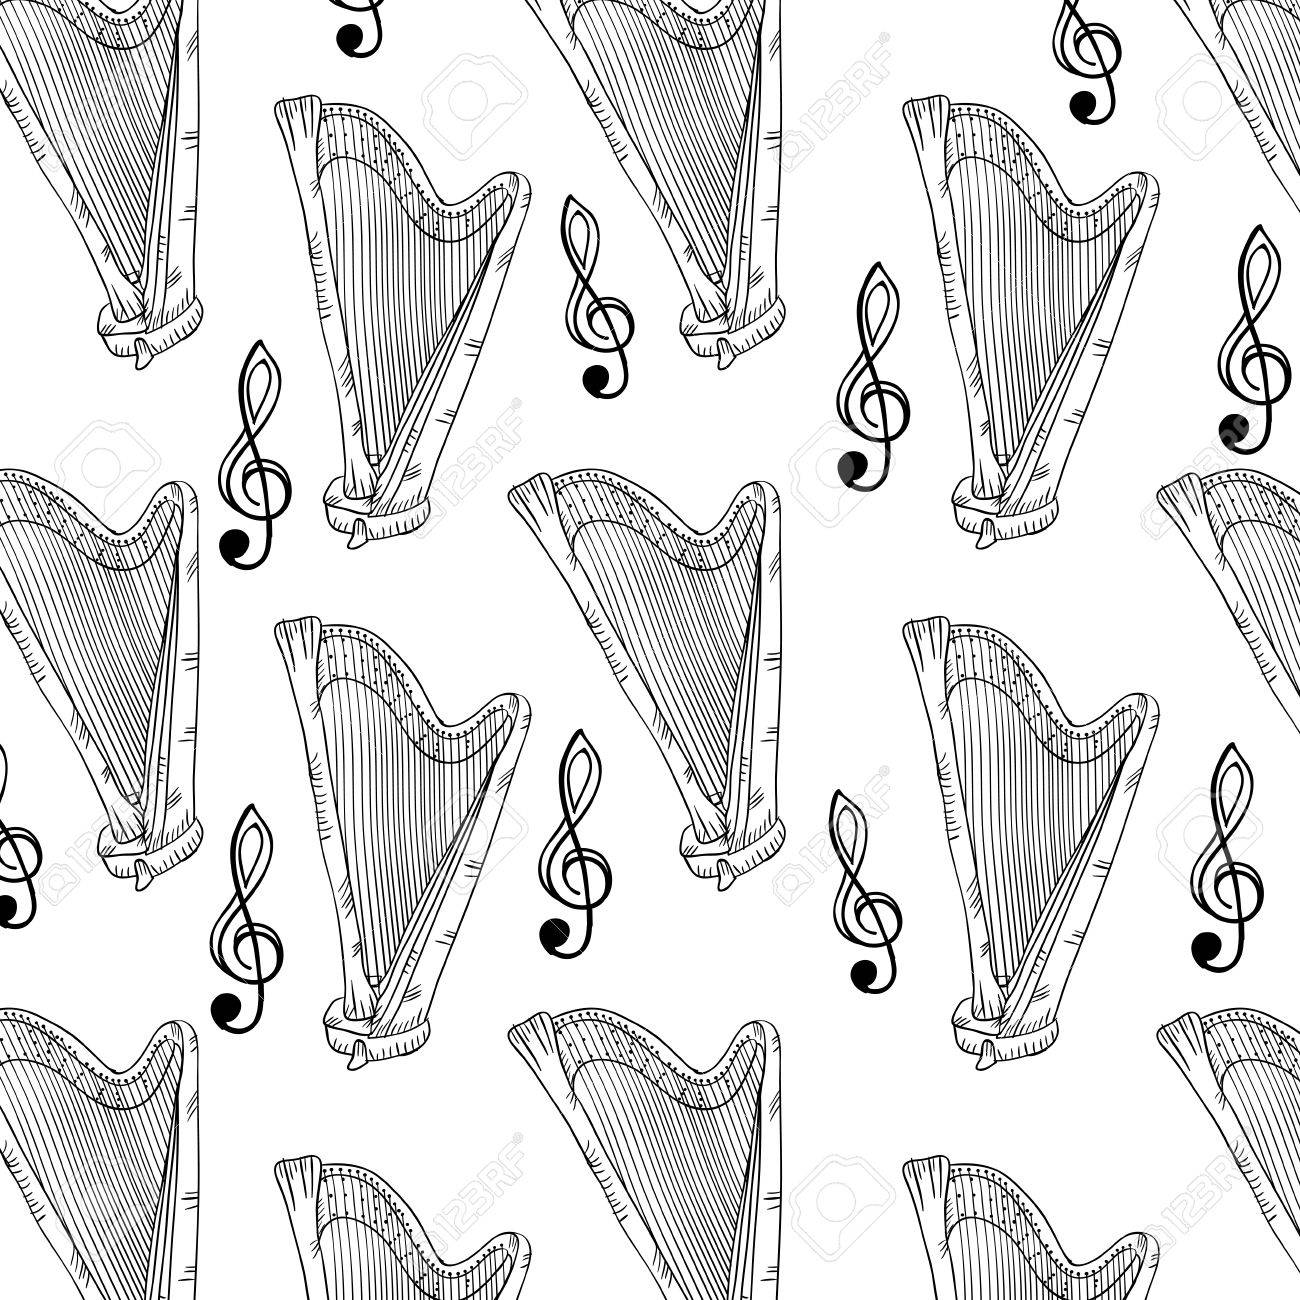 Musical Wallpaper With Music Notes And Classic Harp Instrument